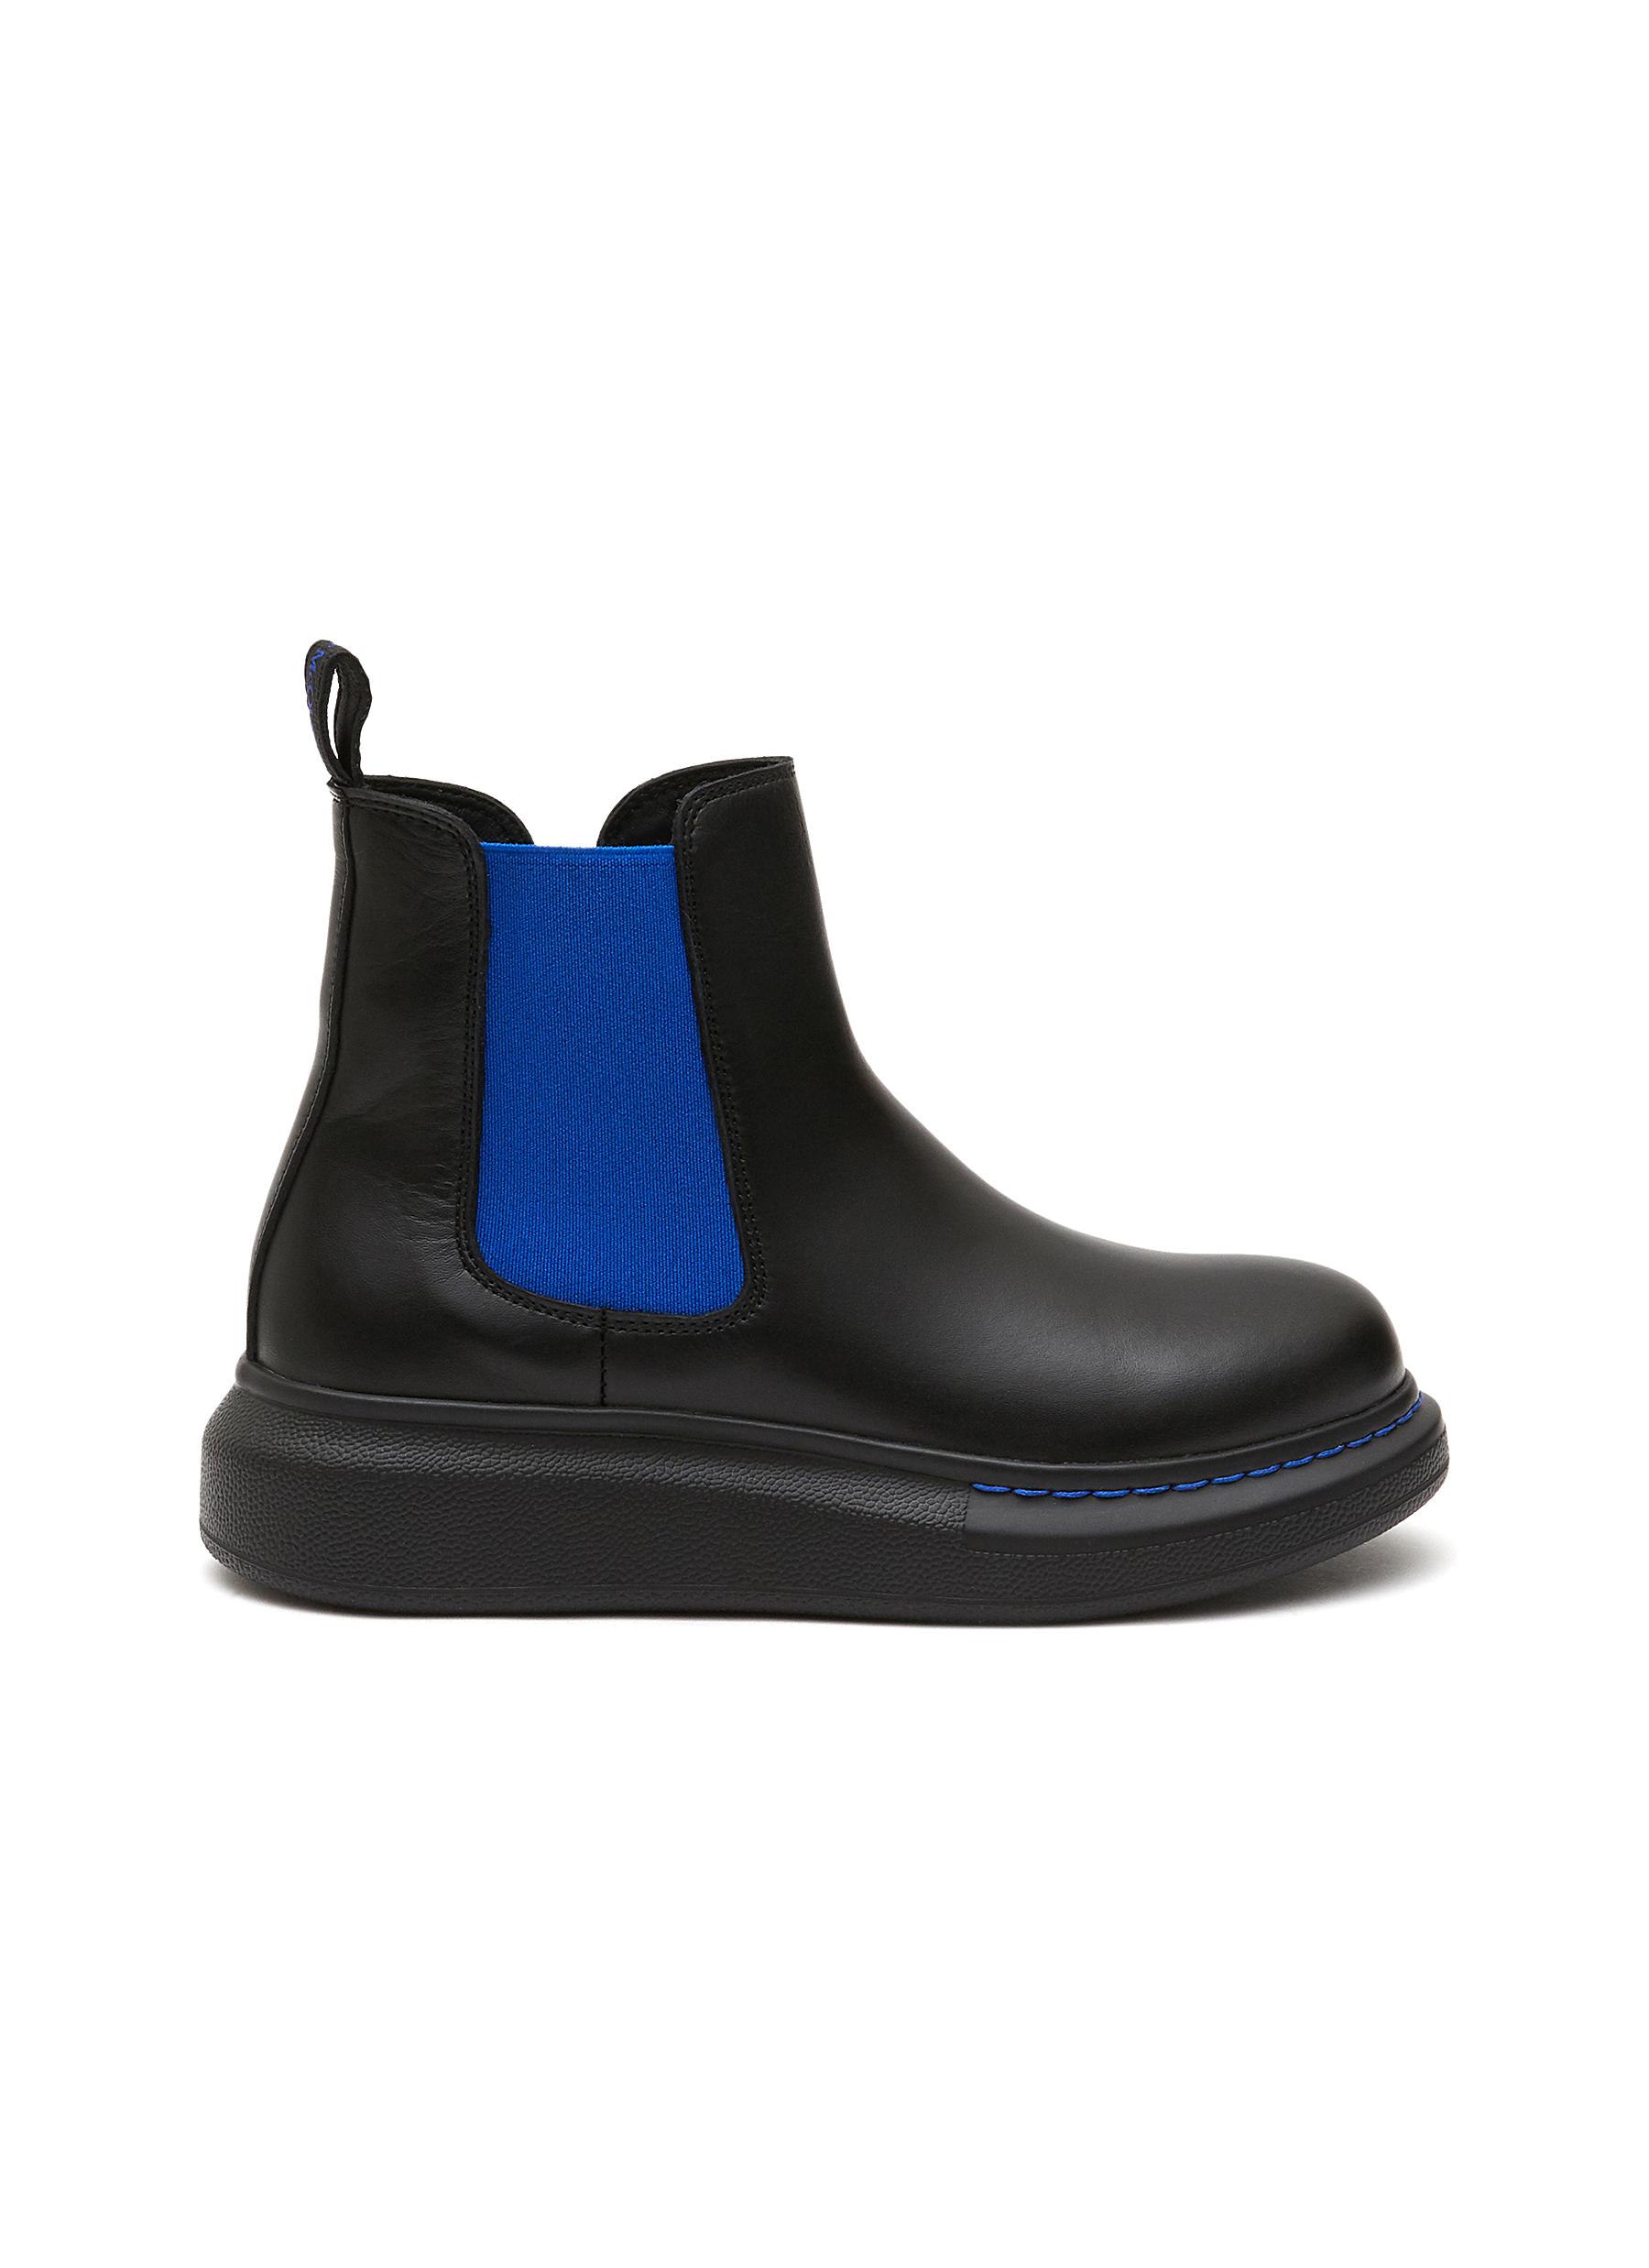 'Molly' kids and toddler leather platform Chelsea boots